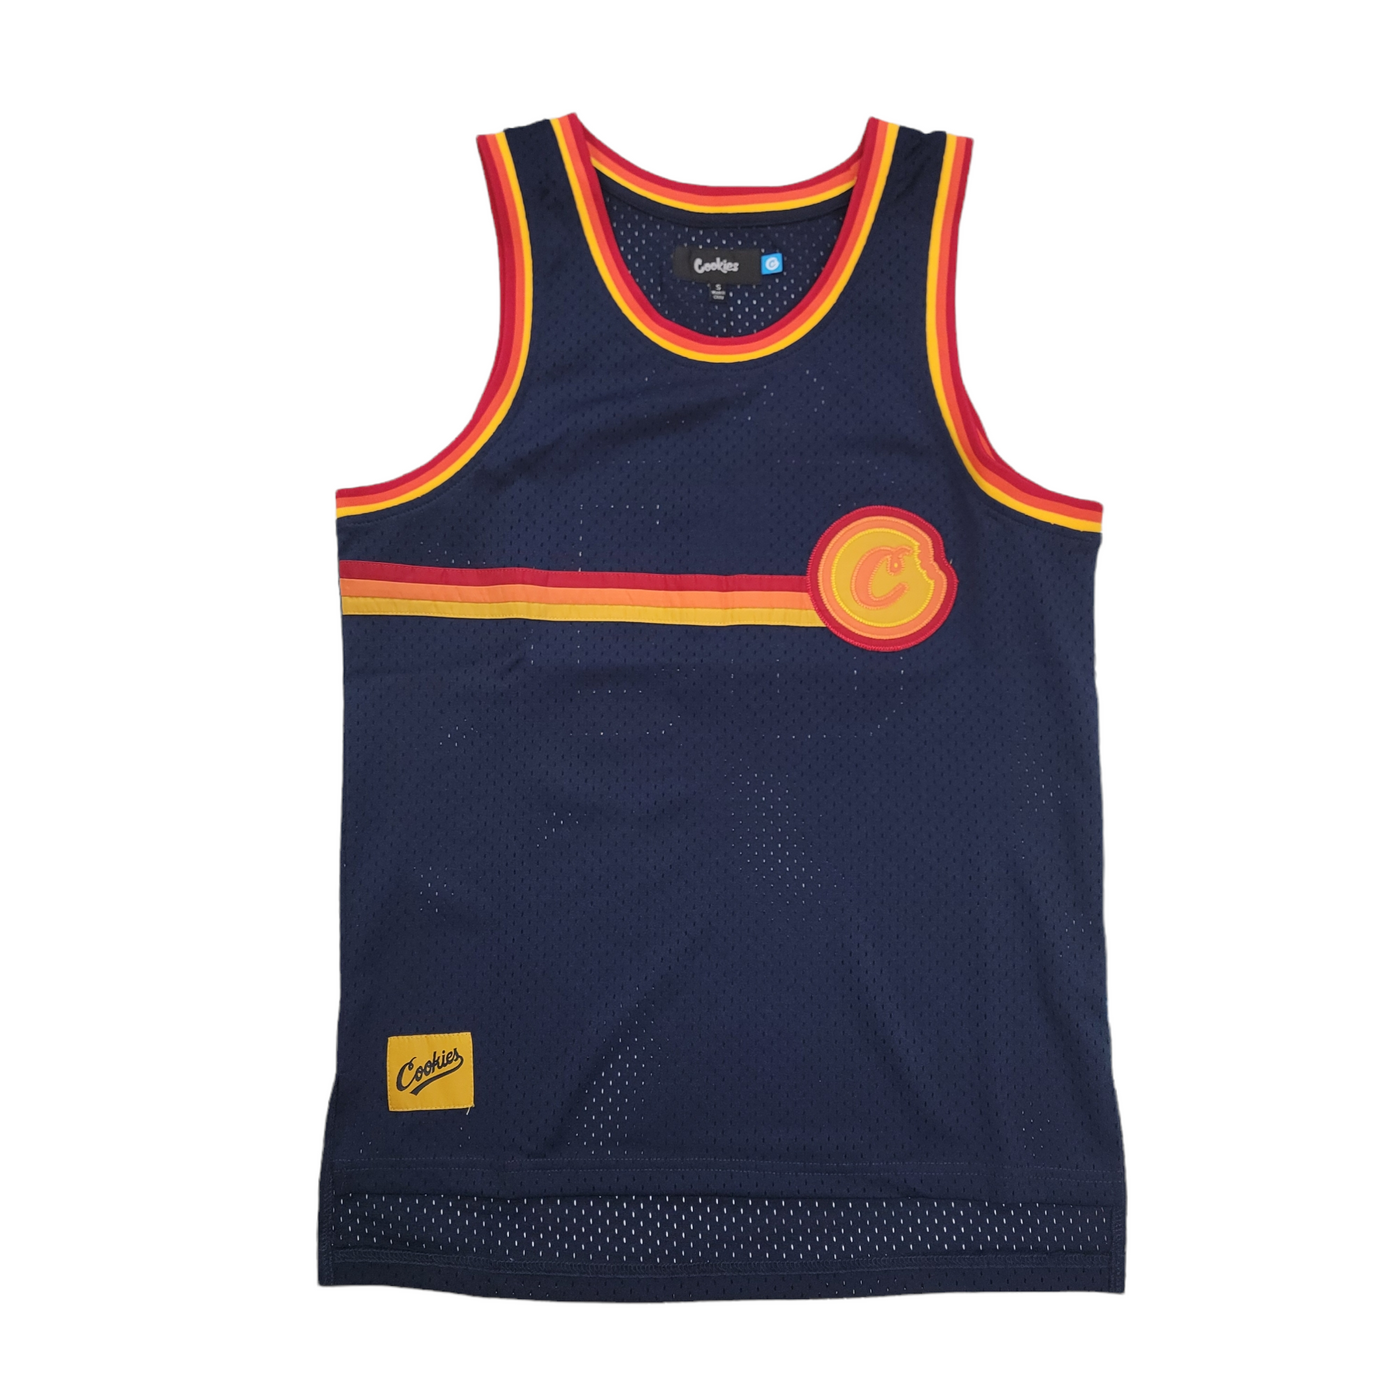 Cookies Putting In Work Basketball Jersey Navy